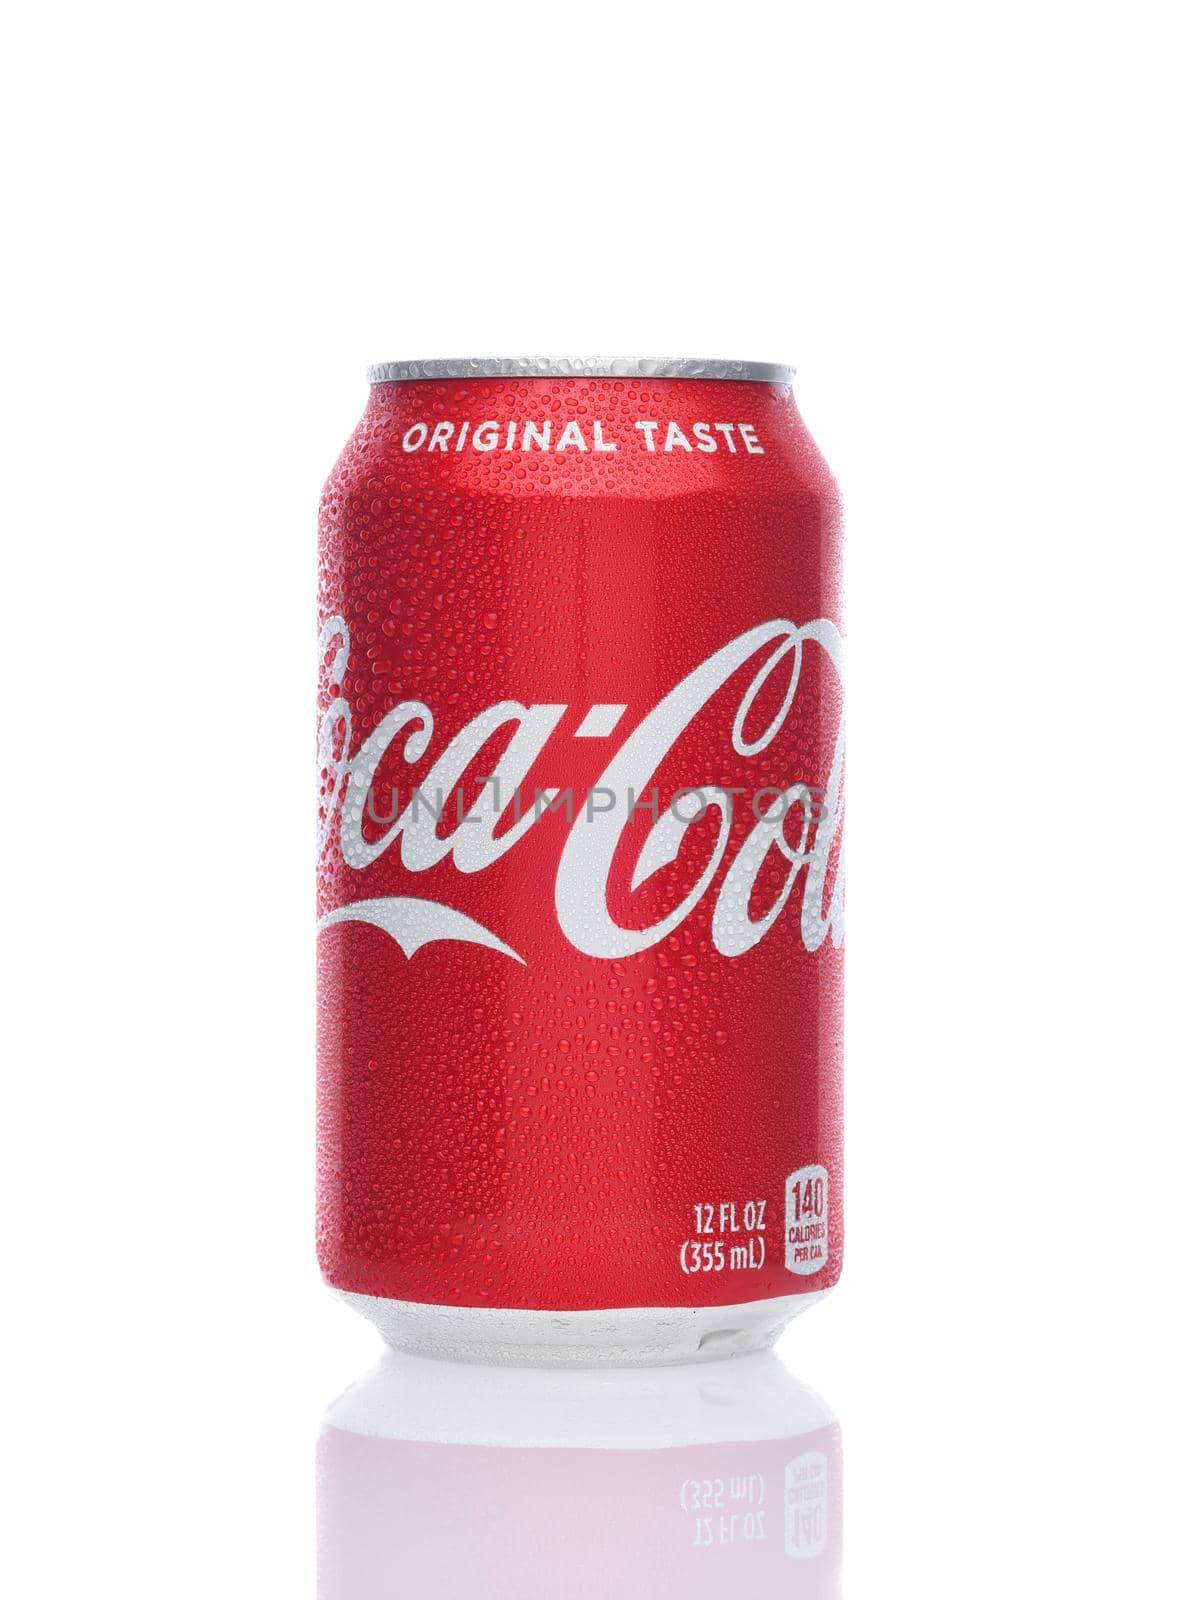 IRVINE, CALIFORNIA - 26 JUNE 2021: A 12 ounce can of Coca-Cola. Coke is the one of the worlds favorite carbonated beverages.